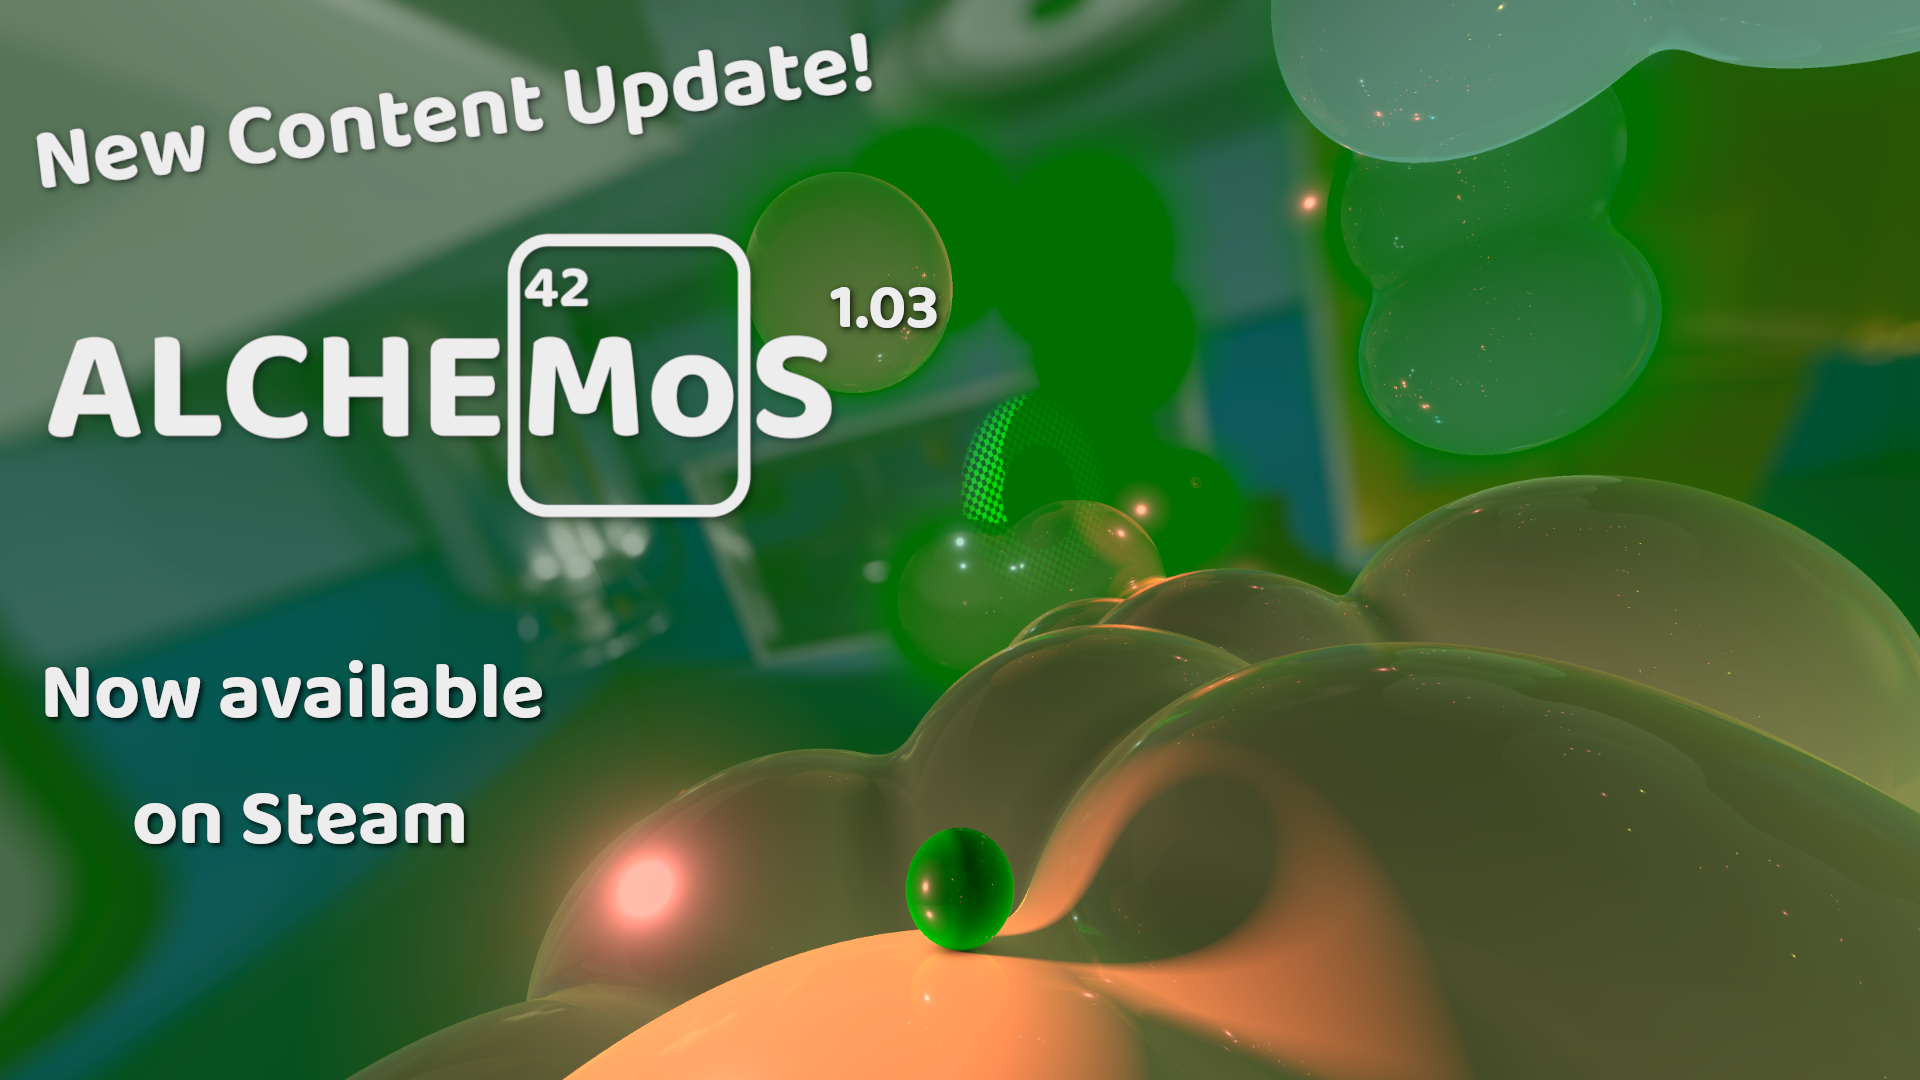 AlCHeMoS v1.03 is NOW AVAILABLE ON STEAM!